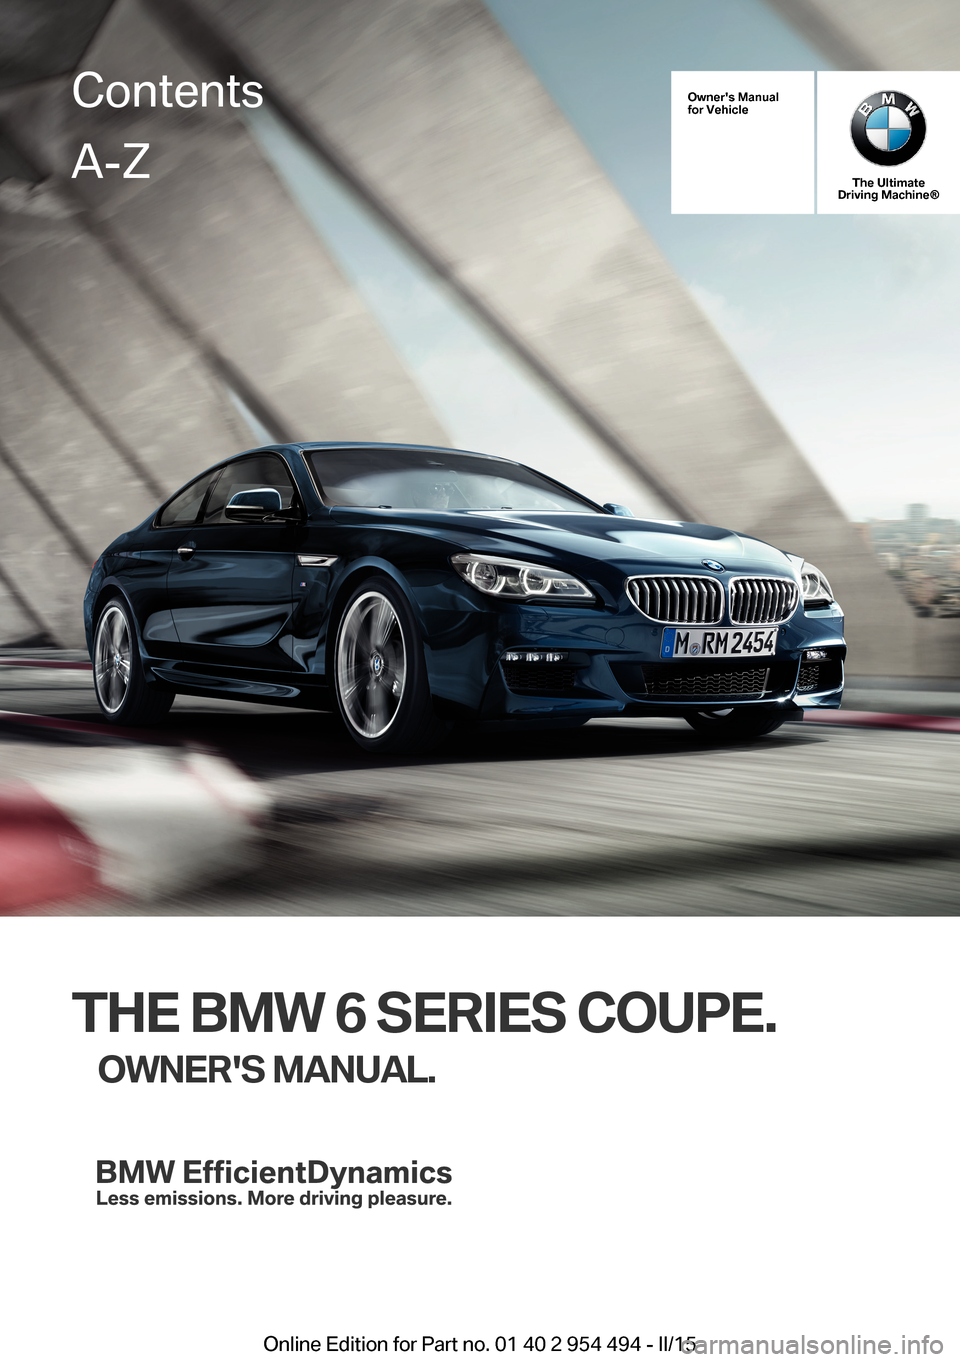 BMW 6 SERIES COUPE 2015 F13 Owners Manual Owners Manualfor Vehicle
The UltimateDriving Machine®
THE BMW 6 SERIES COUPE.
OWNERS MANUAL.ContentsA-Z
Online Edition for Part no. 01 40 2 954 494 - II/15   